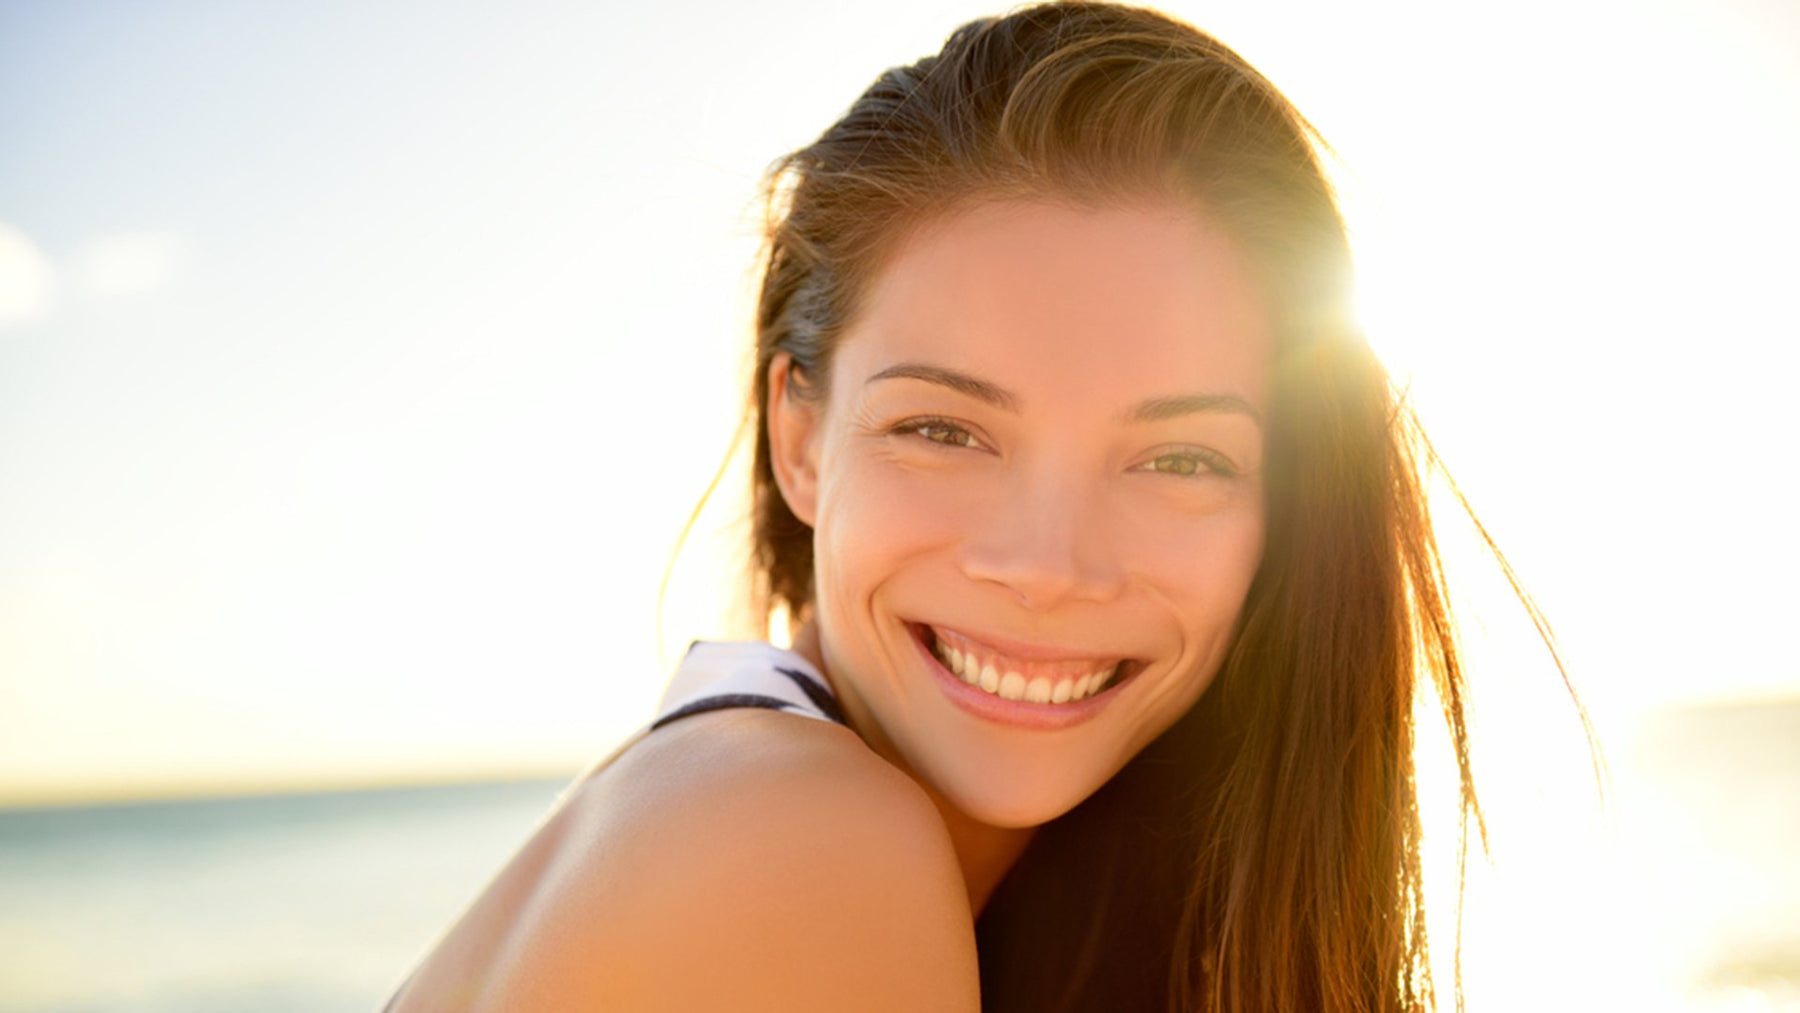 Vitamin D skincare is a new solution to cell growth